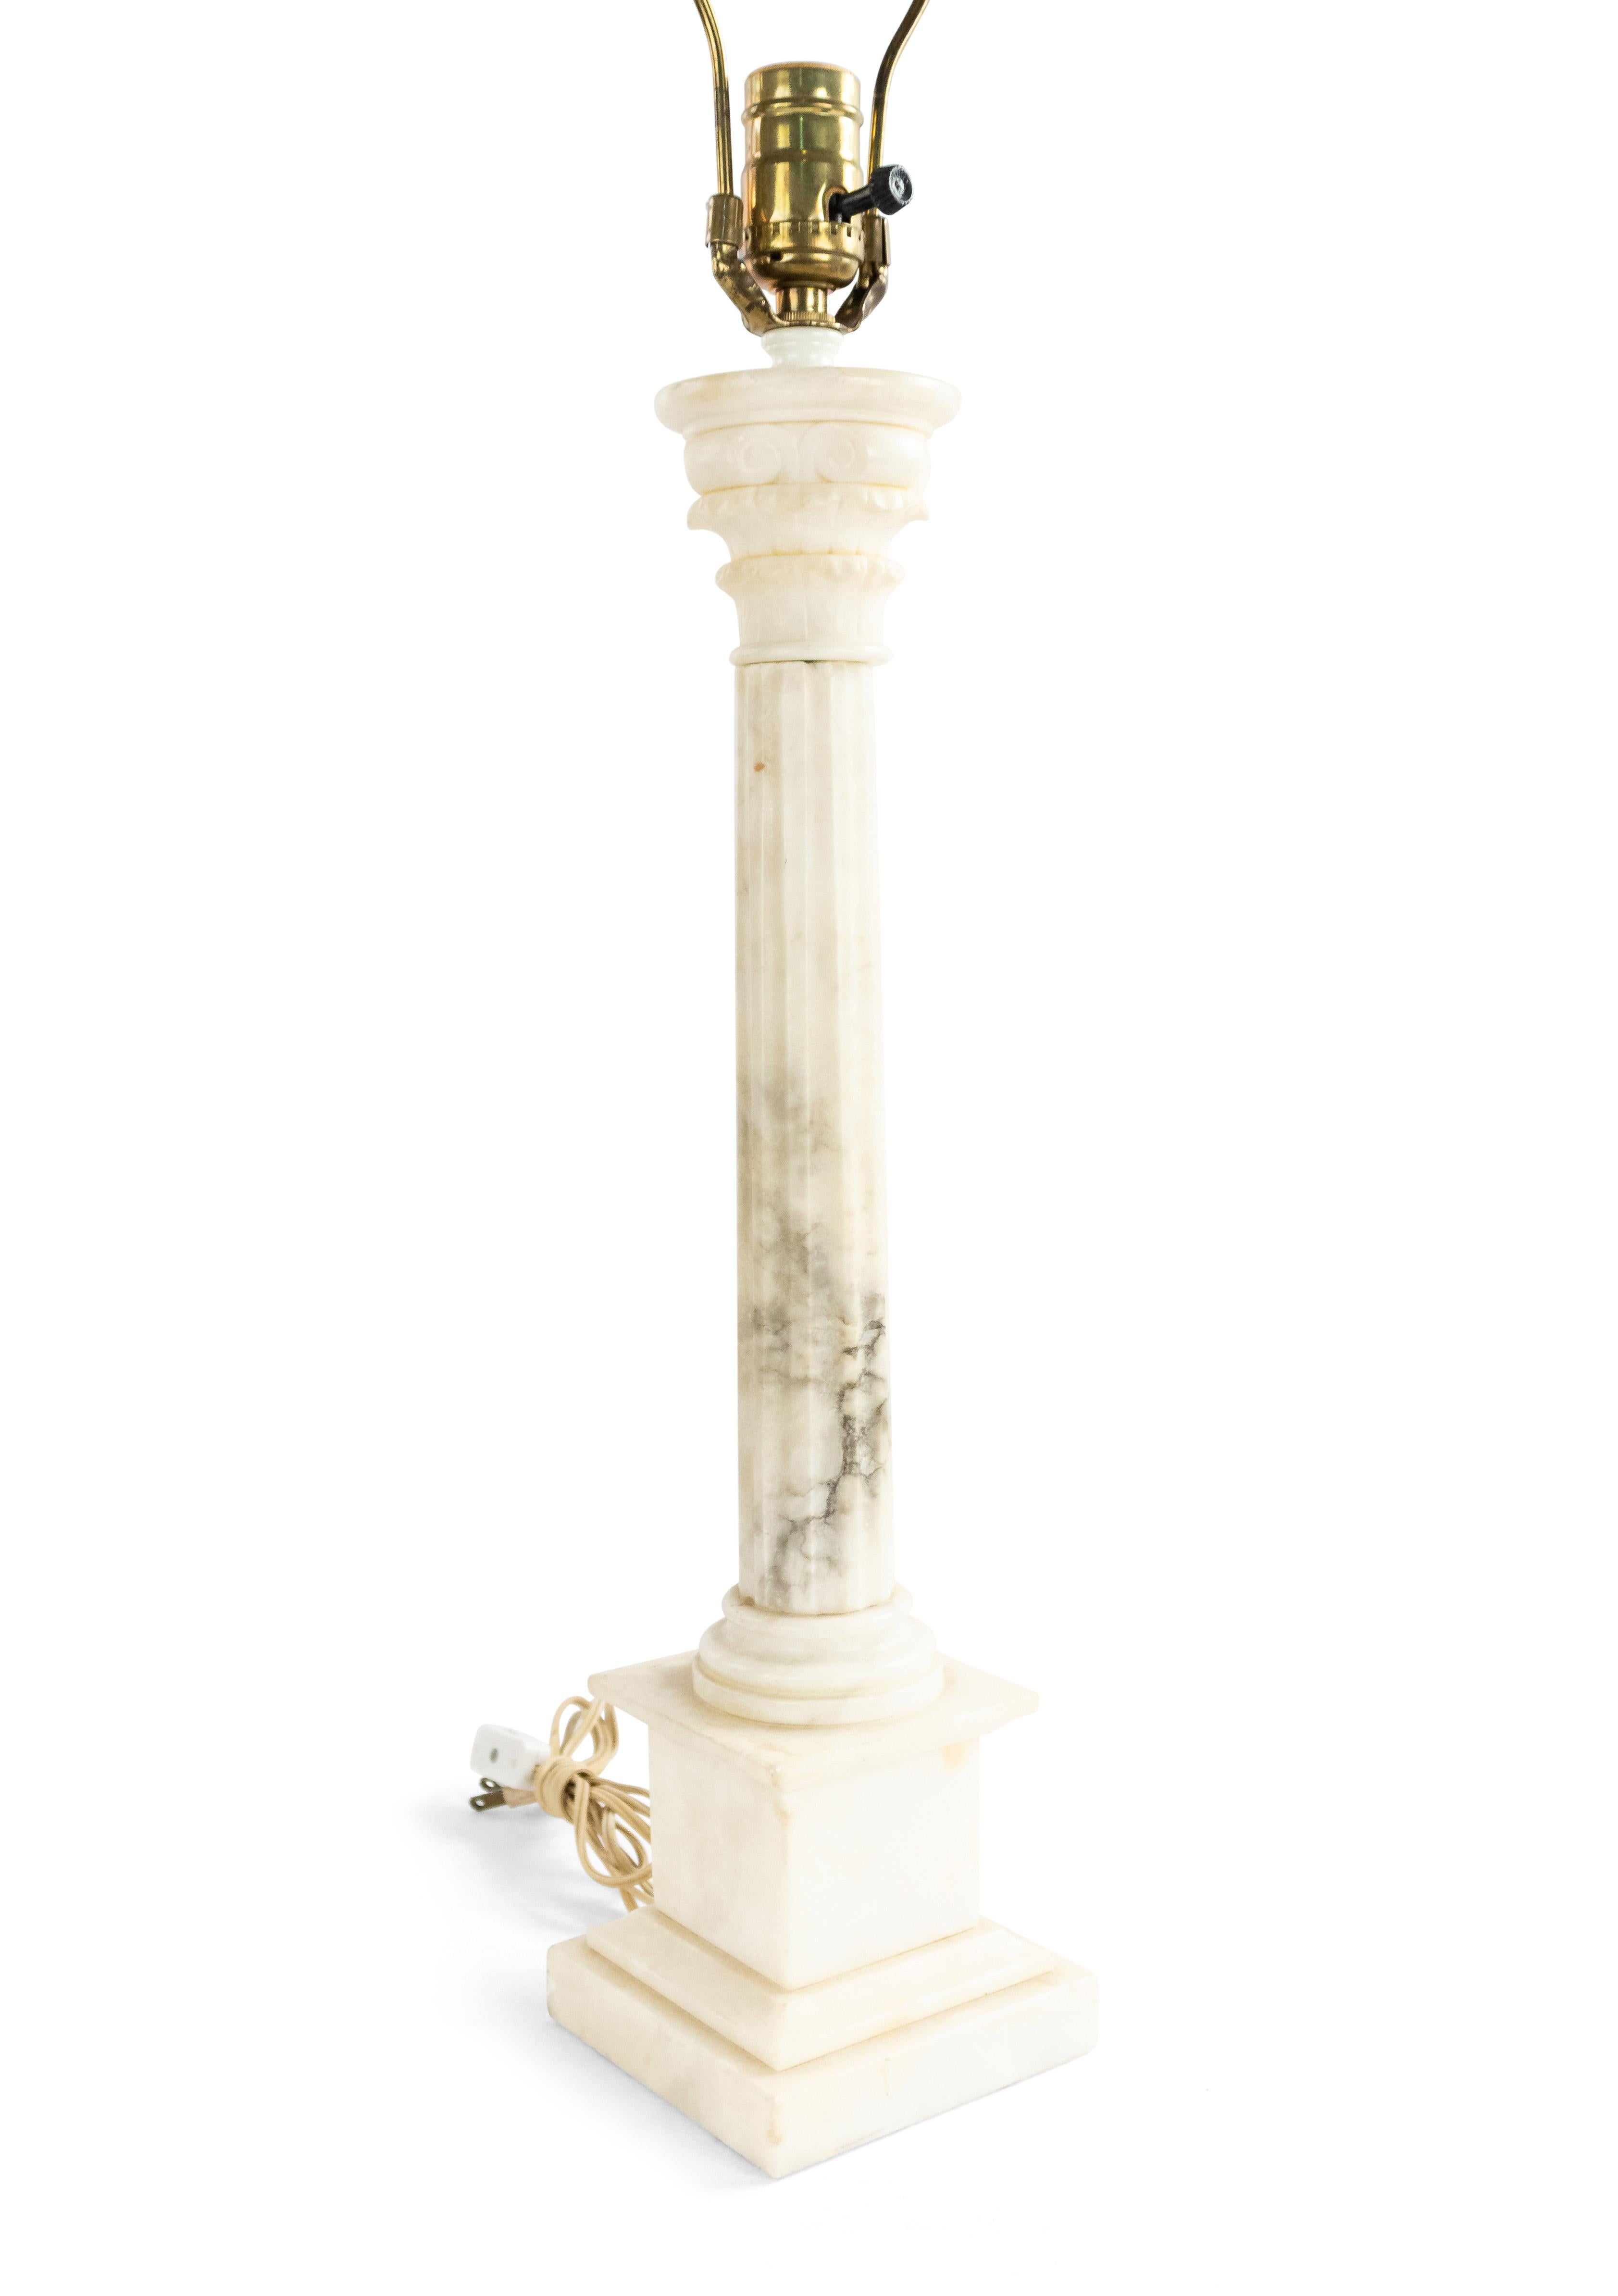 Italian Art Moderne (1930s) white alabaster table lamp with a fluted column on a square base with a carved corinthian capital and floral final.
